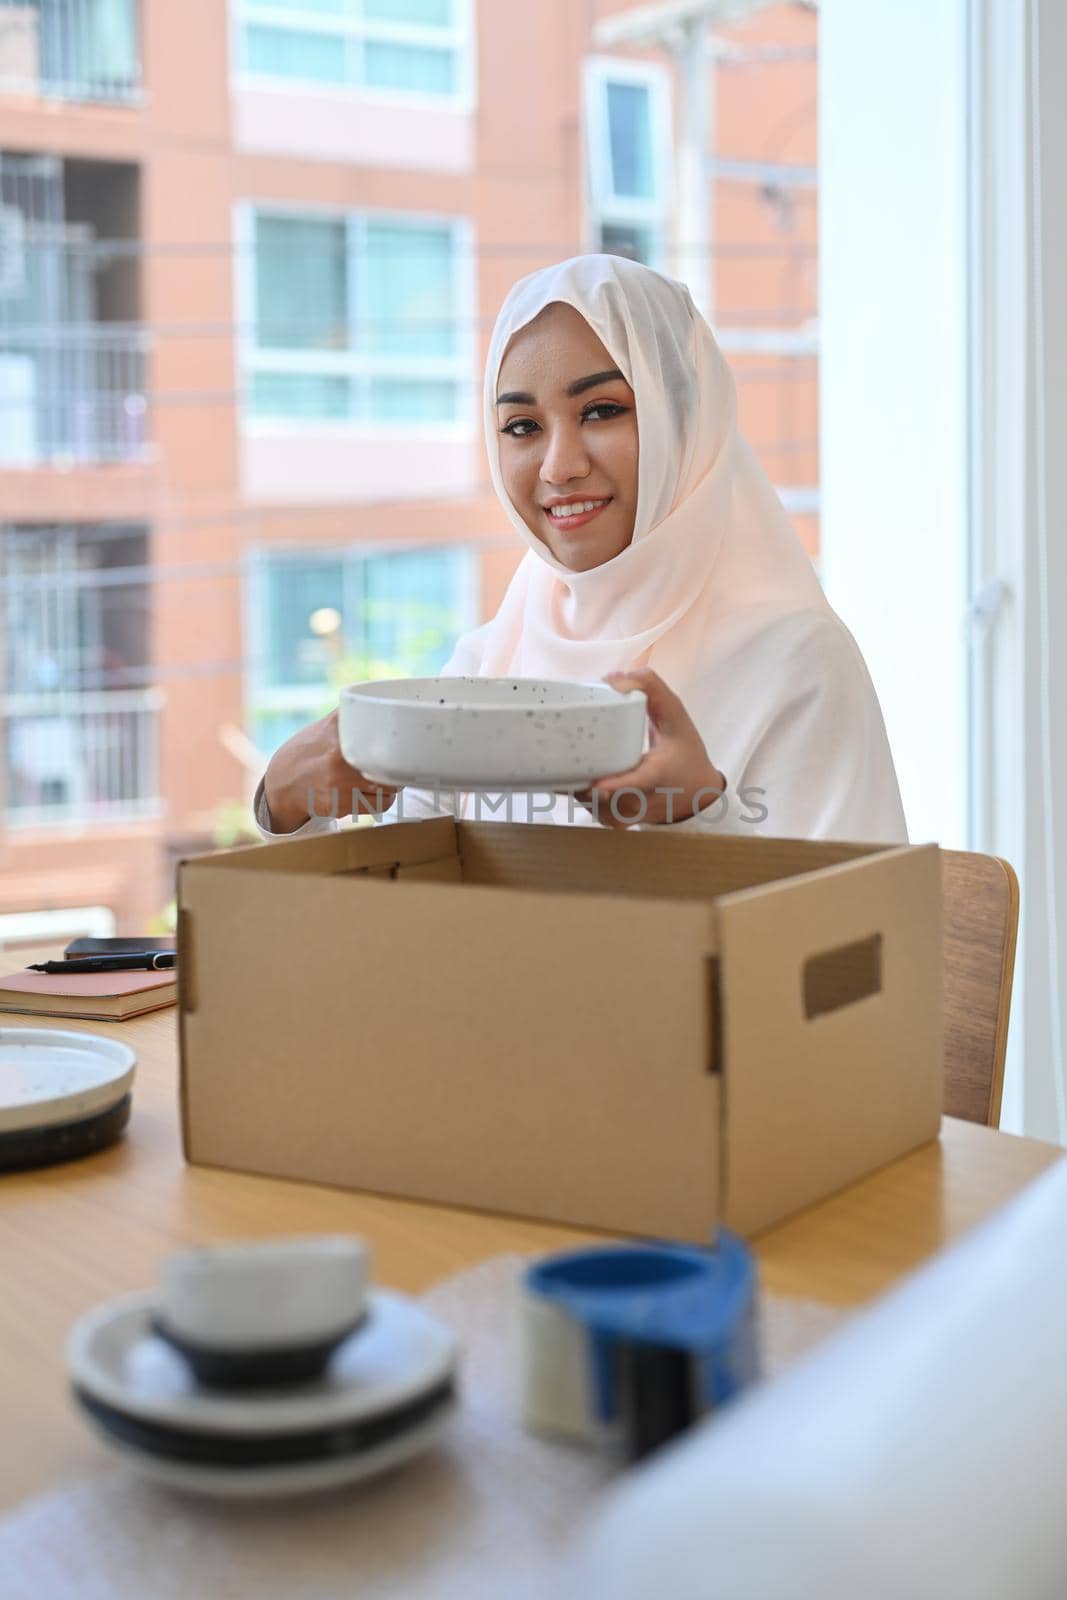 Beautiful Muslim woman in hijab preparing parcel boxes of product for shipping to customers by prathanchorruangsak